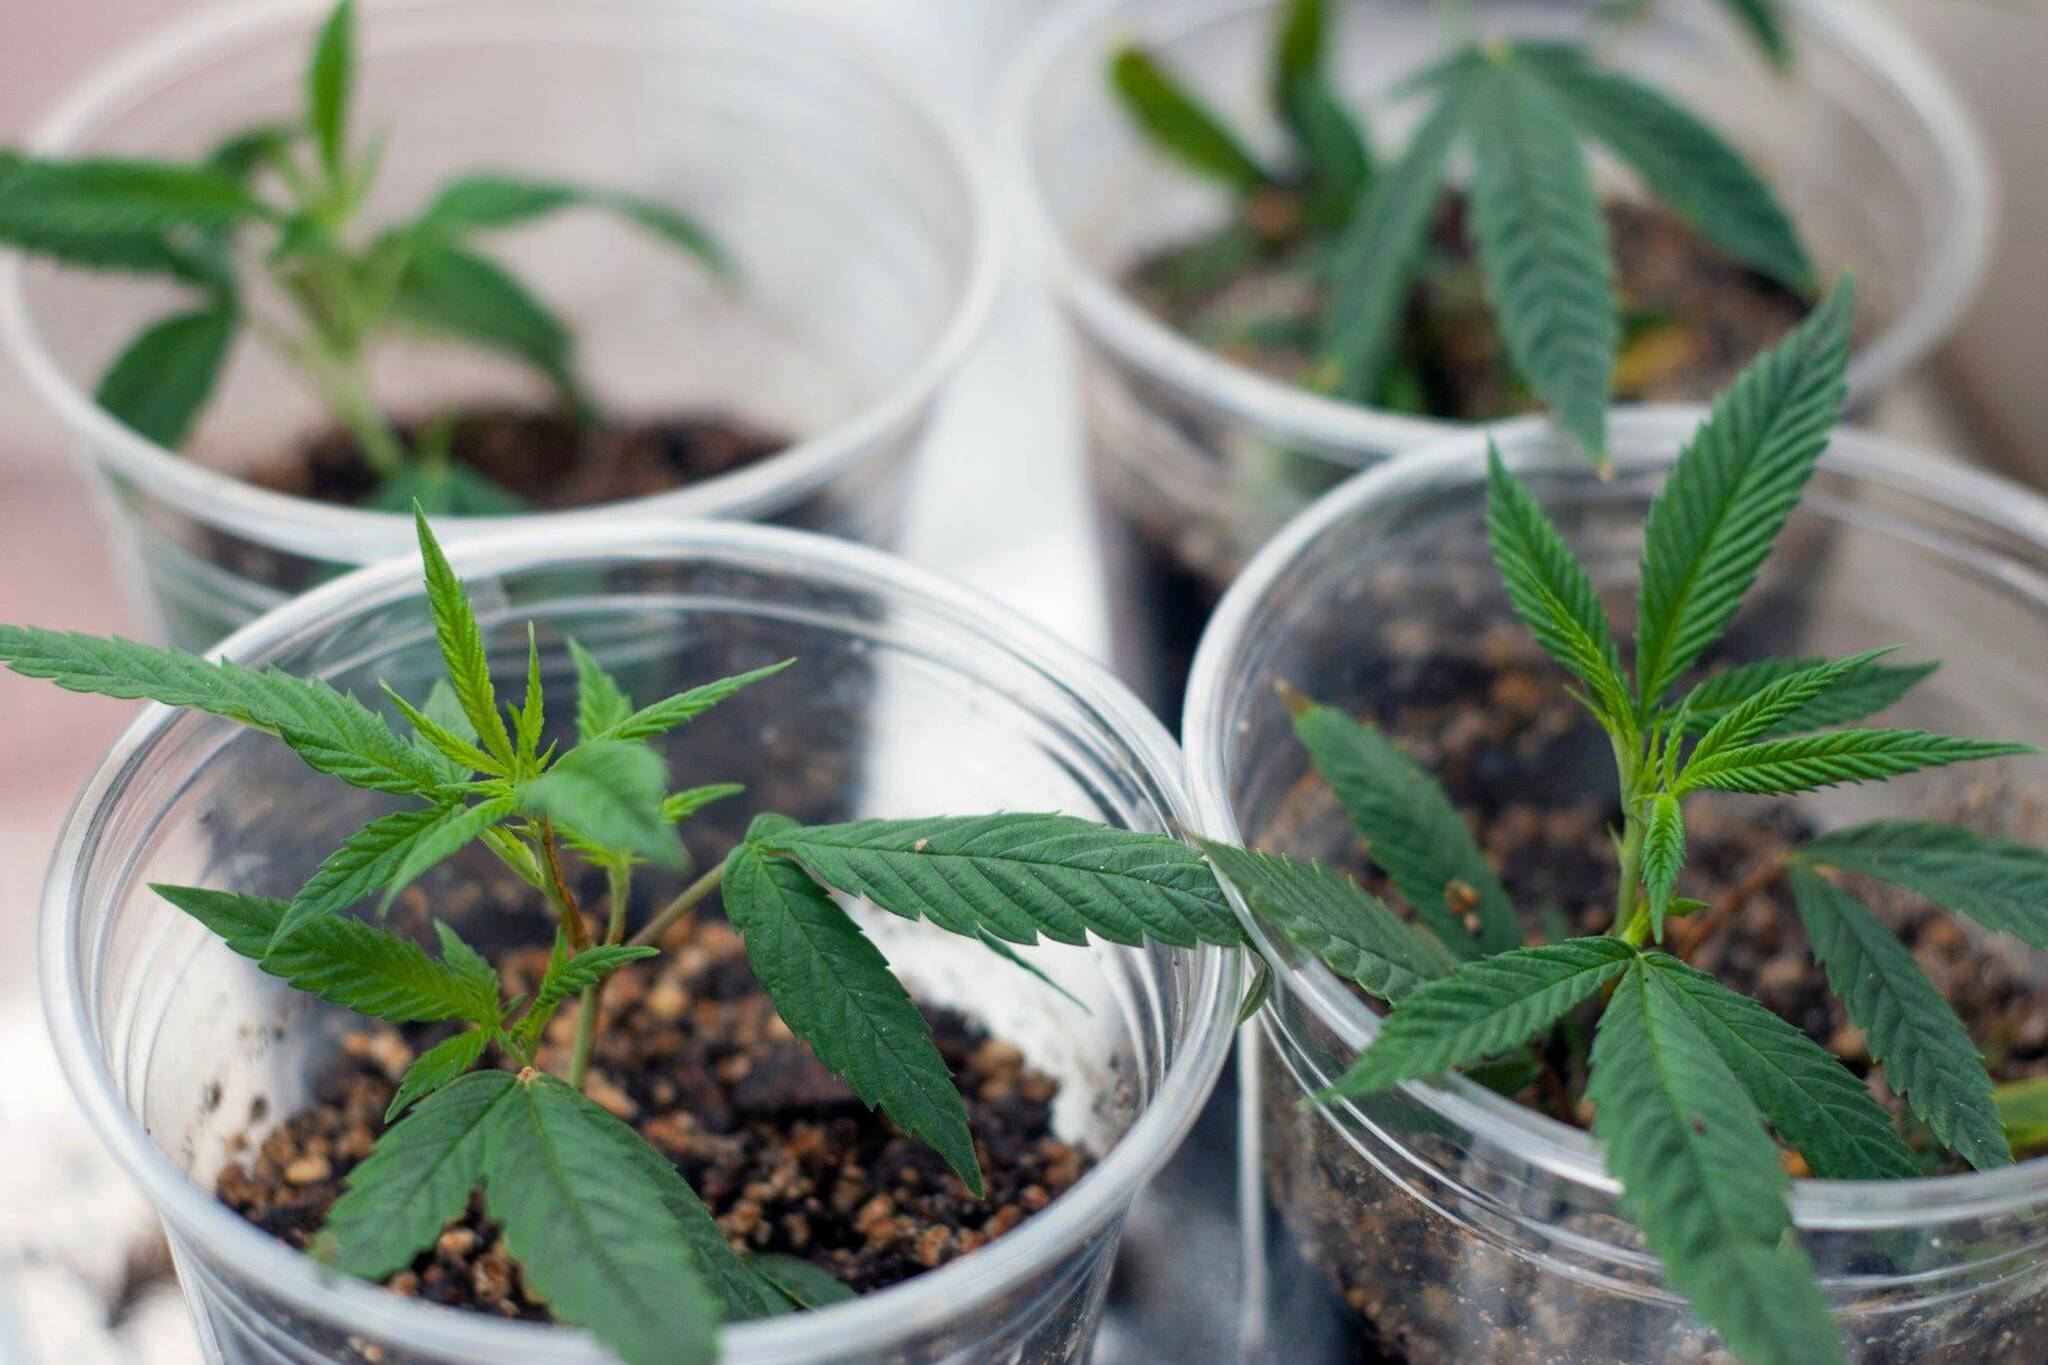 How To Grow Cannabis: A Beginner's Guide To Safely ...